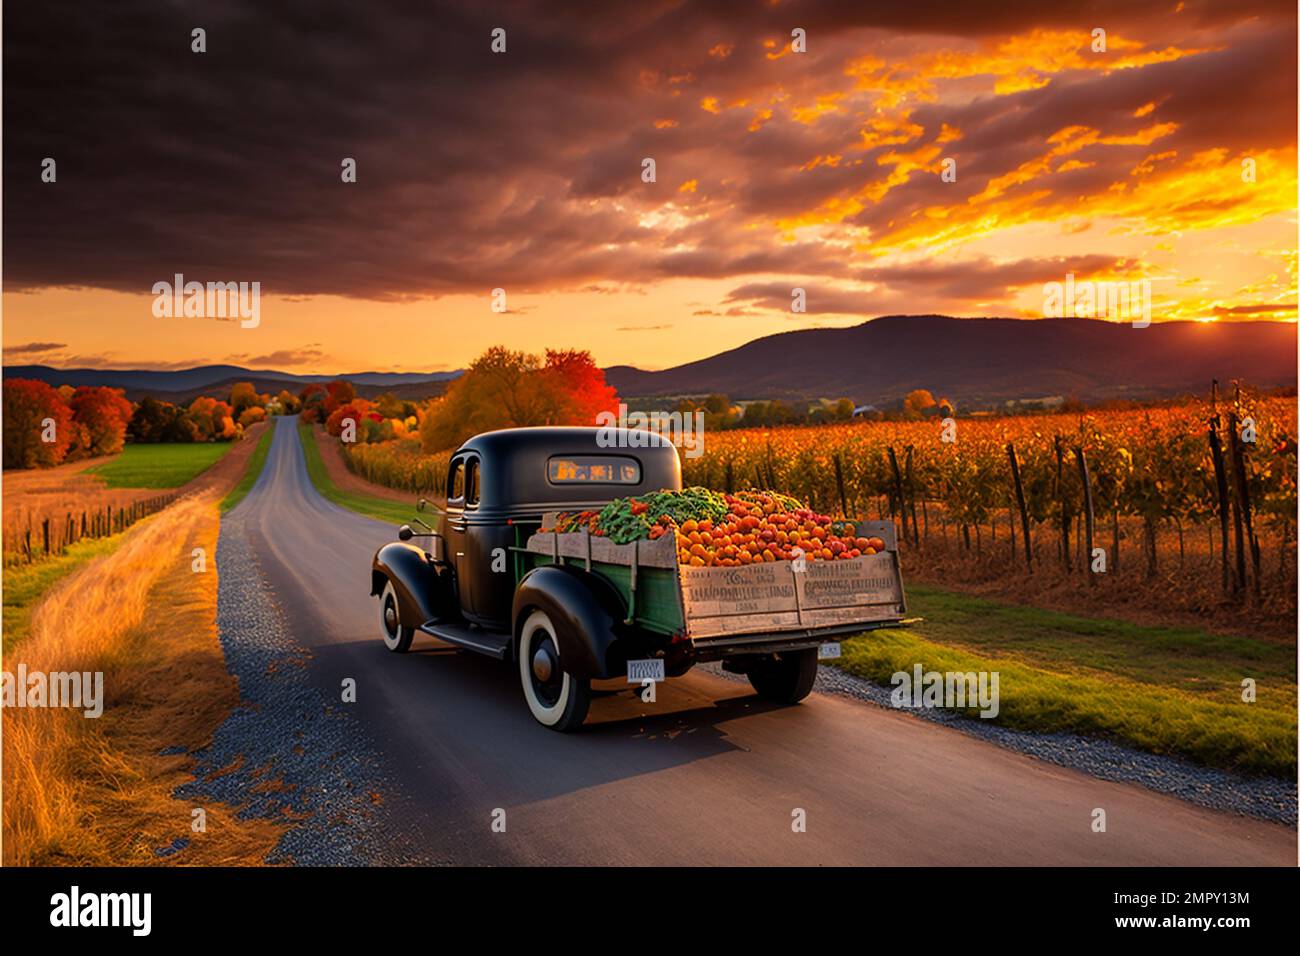 Midjourney AI art landscape taking pumpkins to market in the mountains Stock Photo